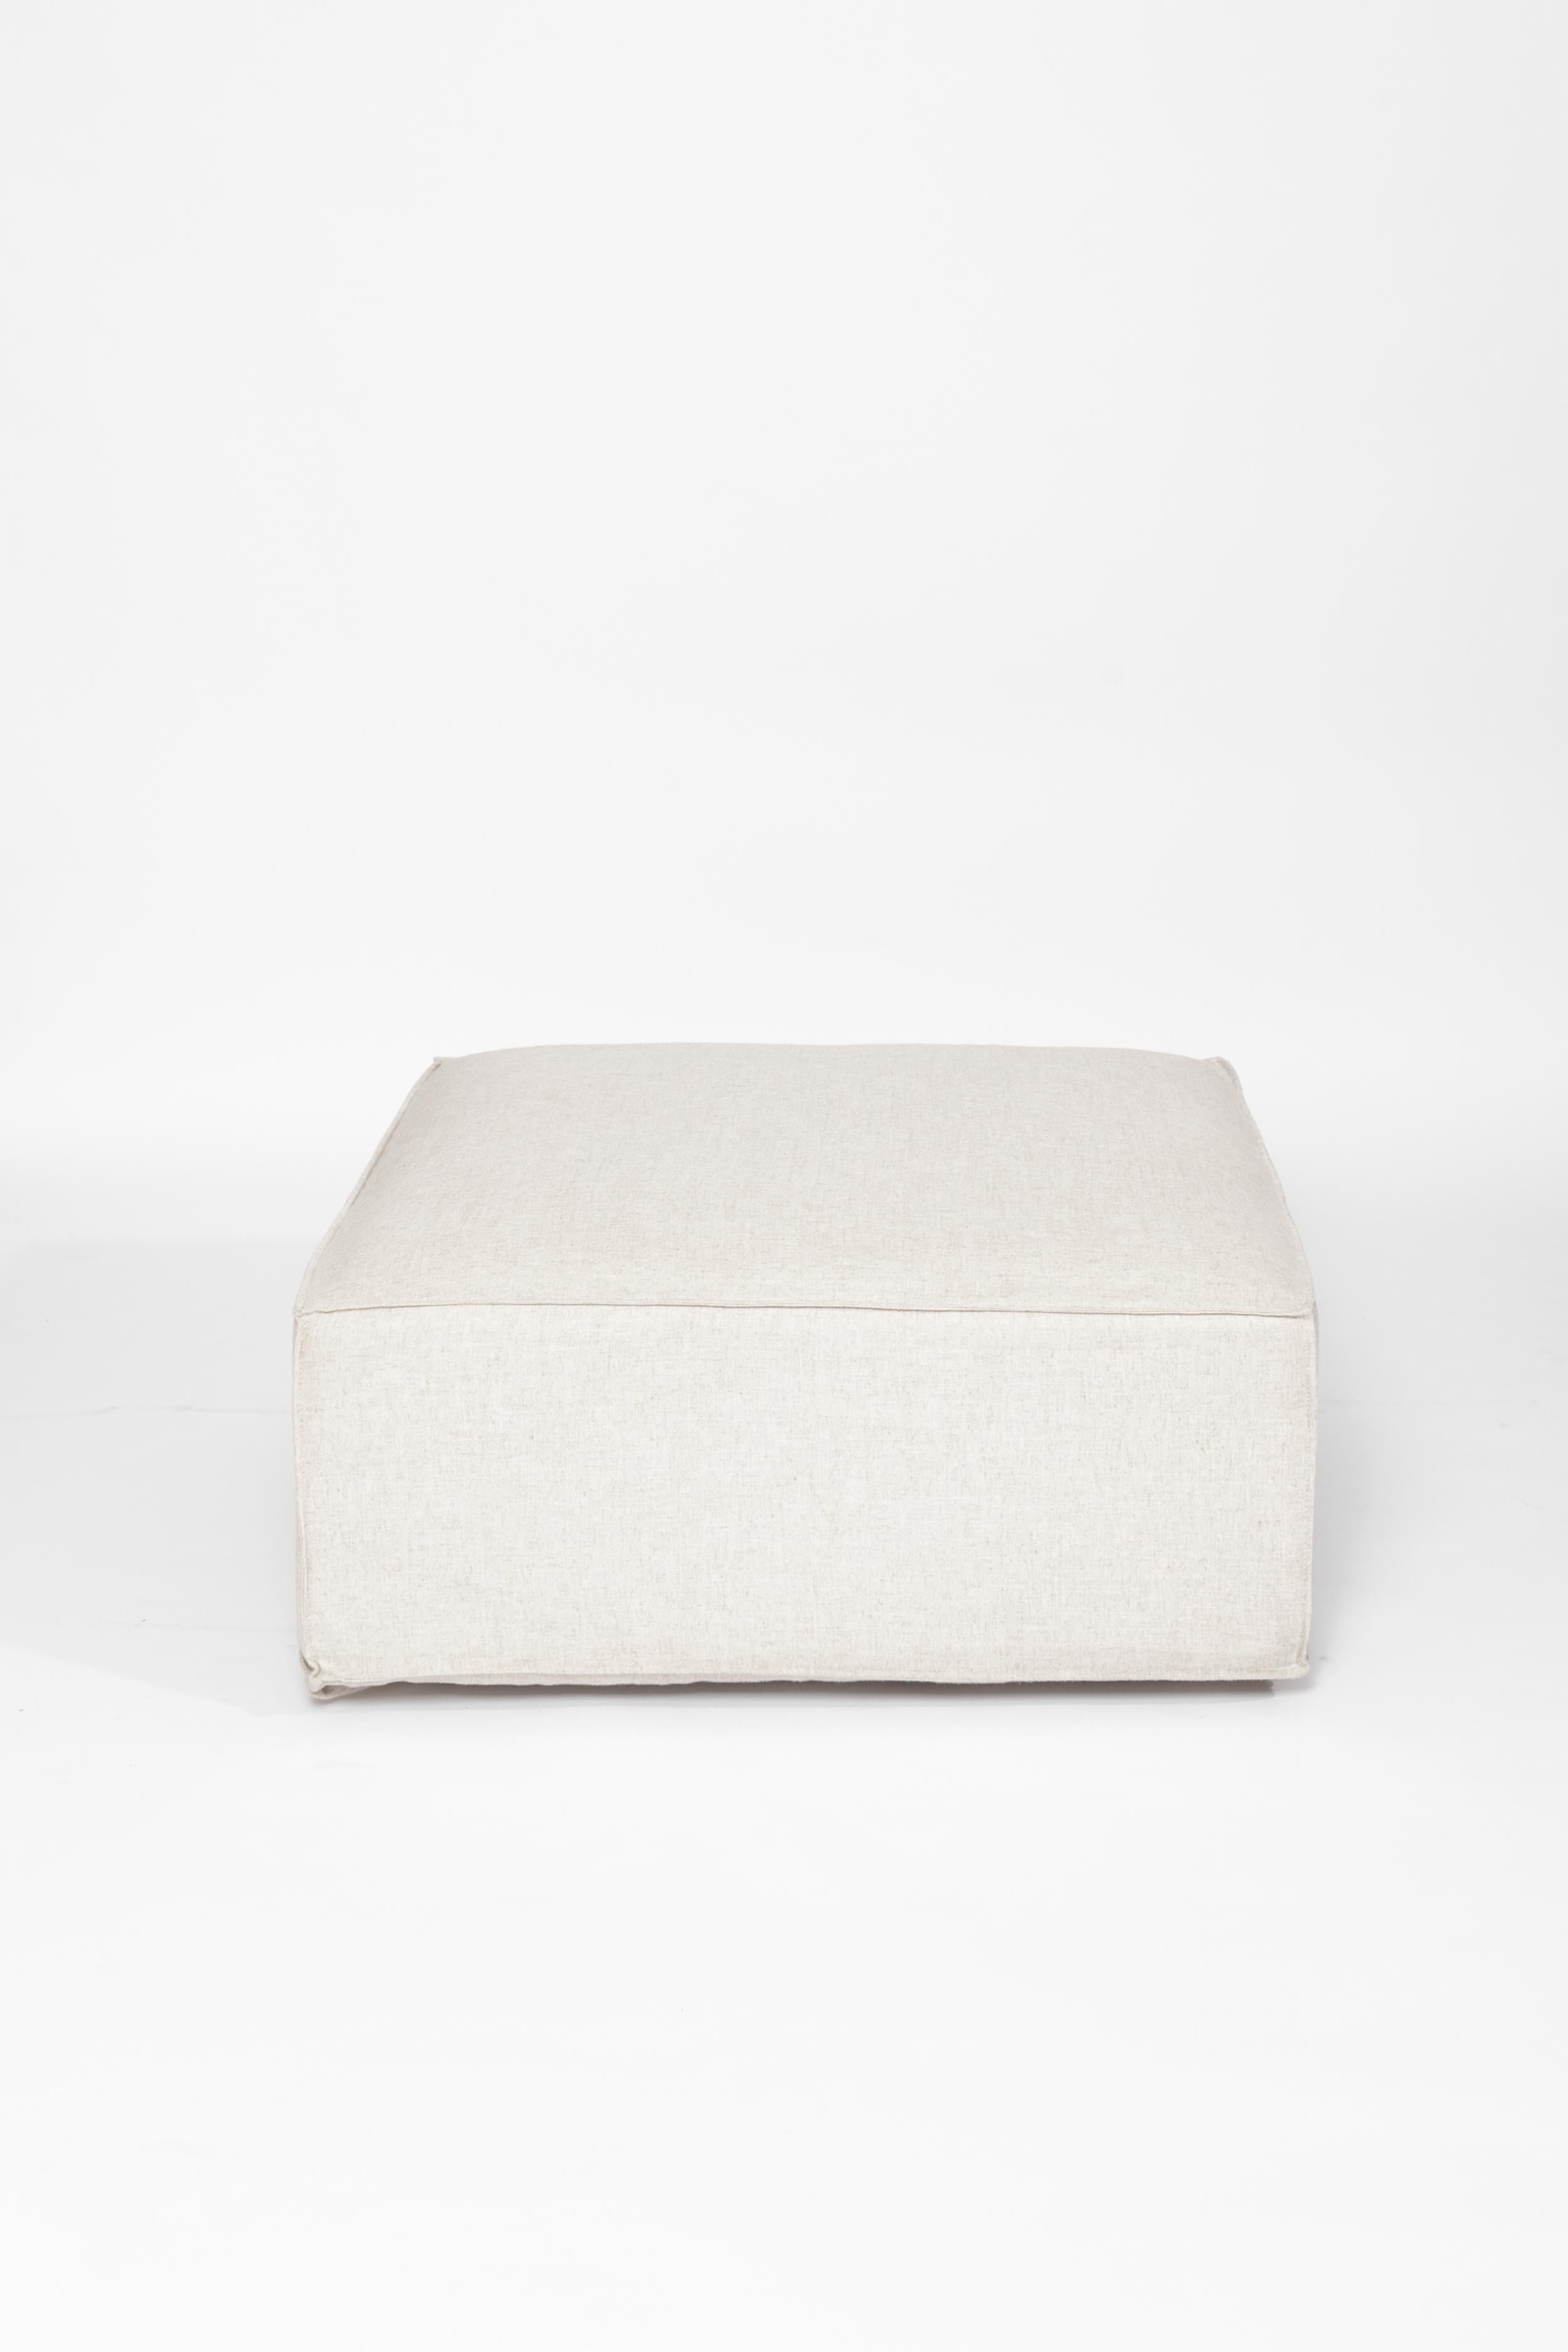 Arena ottoman module for Sofa in linen color fabric upholstery In Distressed Condition In Mexico City, MX